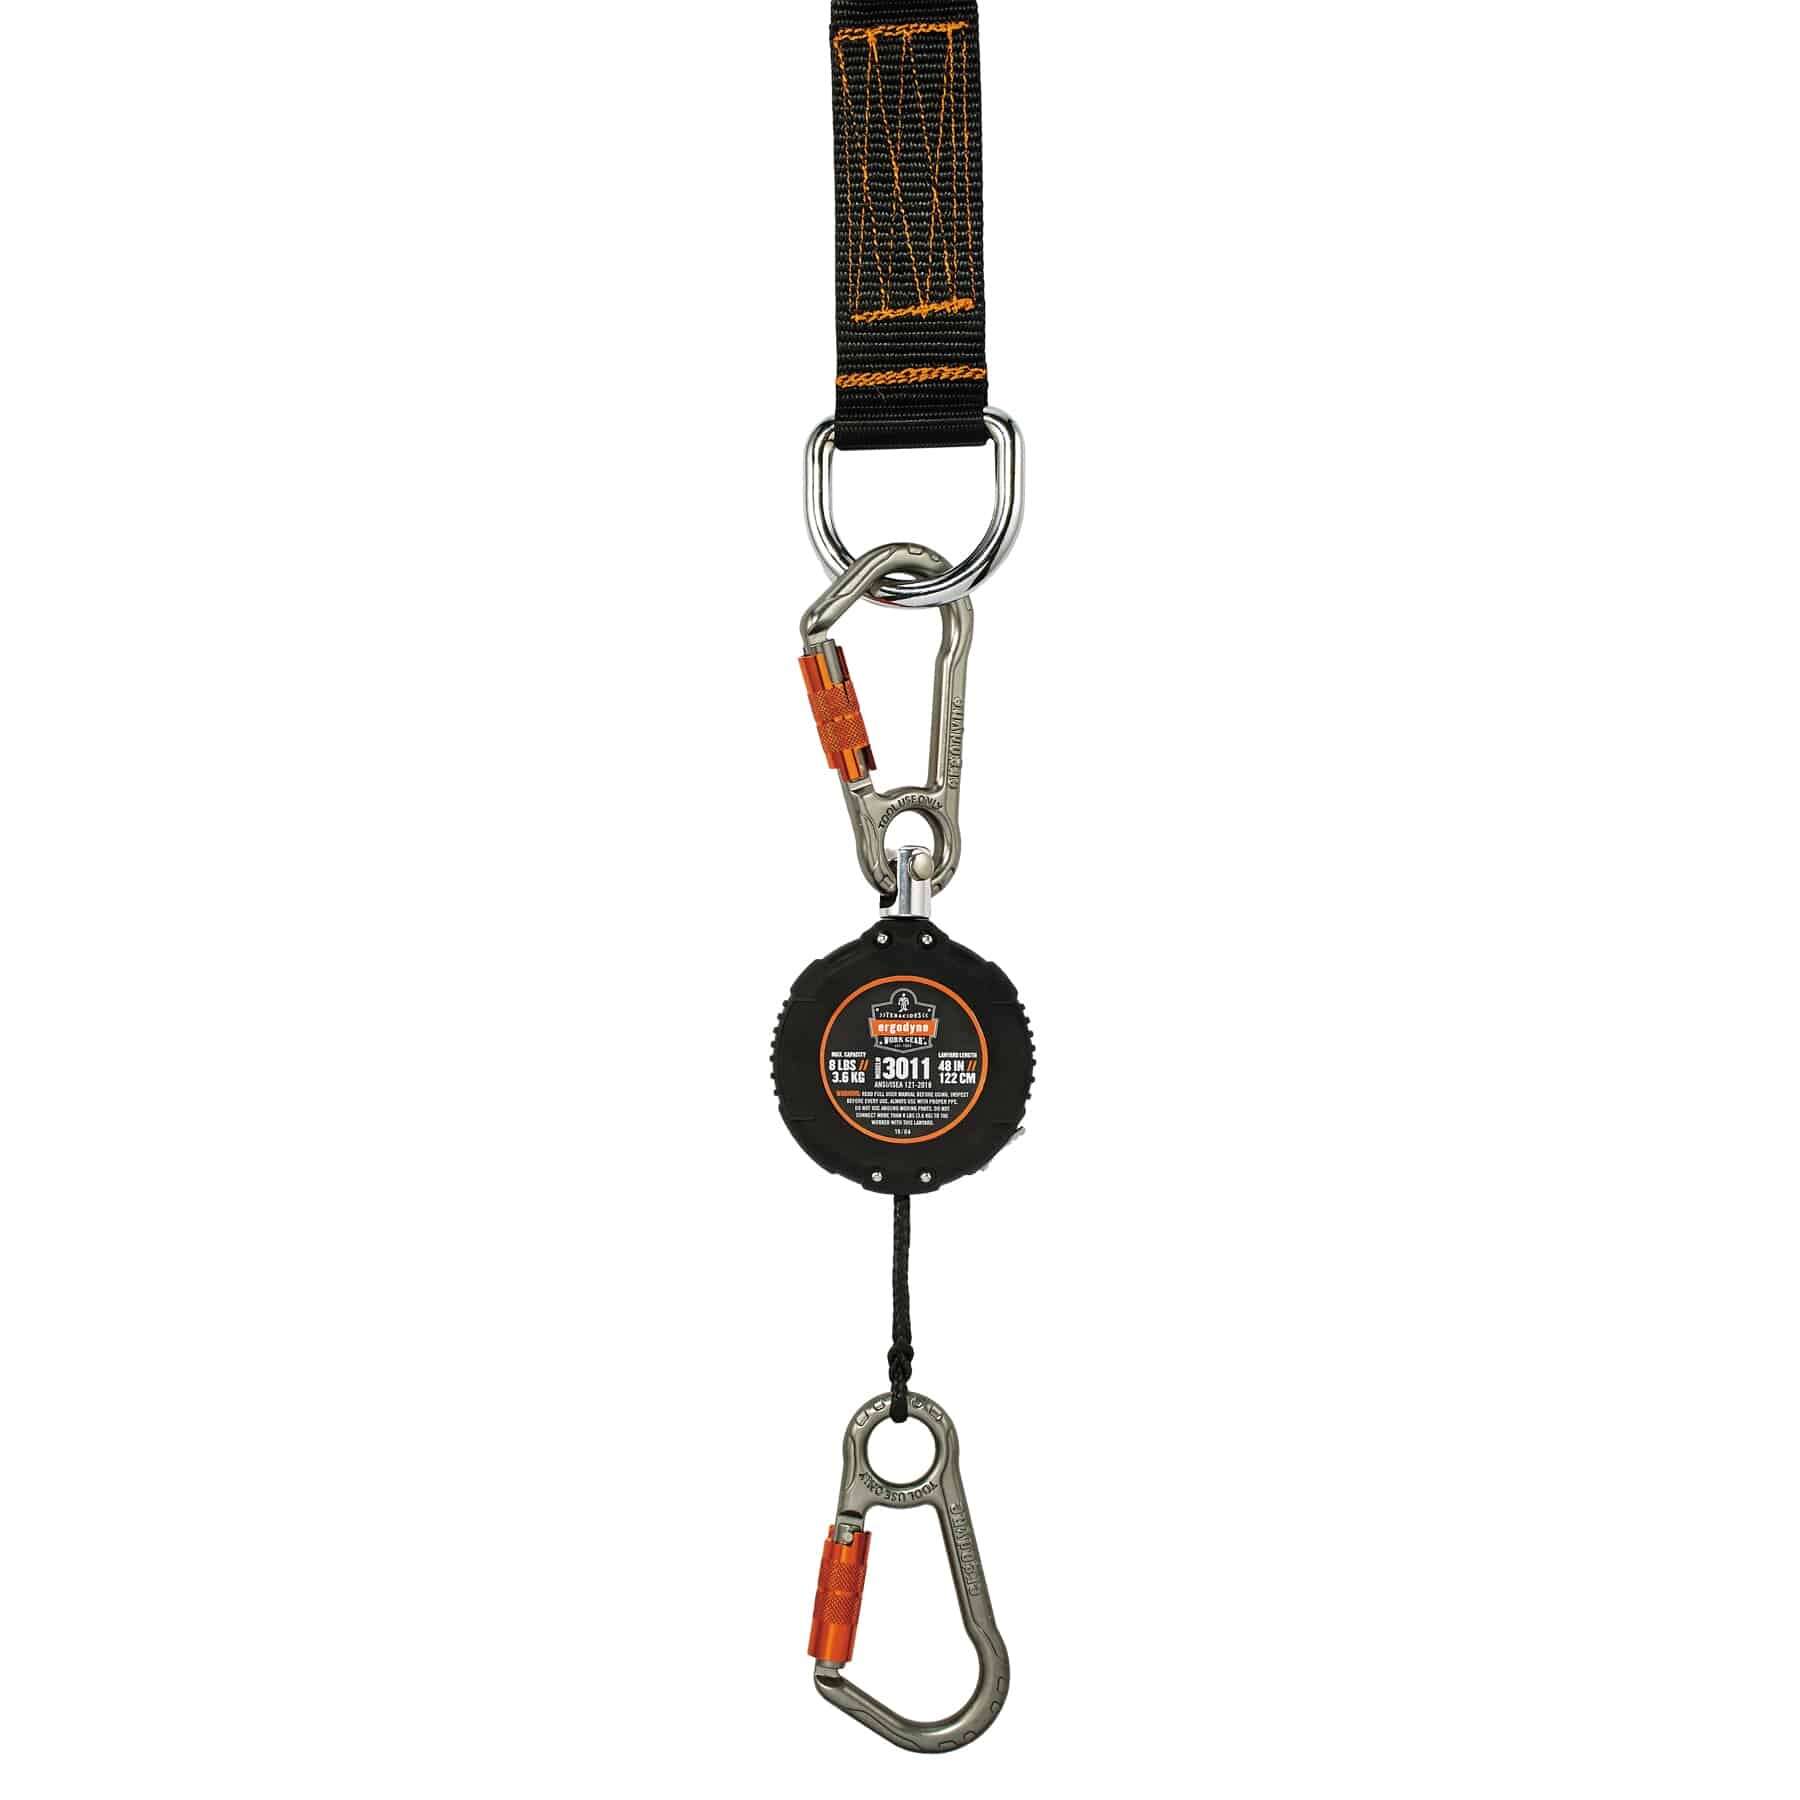 Retractable Tool Lanyard, 3 Pack Safety Tool Leash with Aluminum